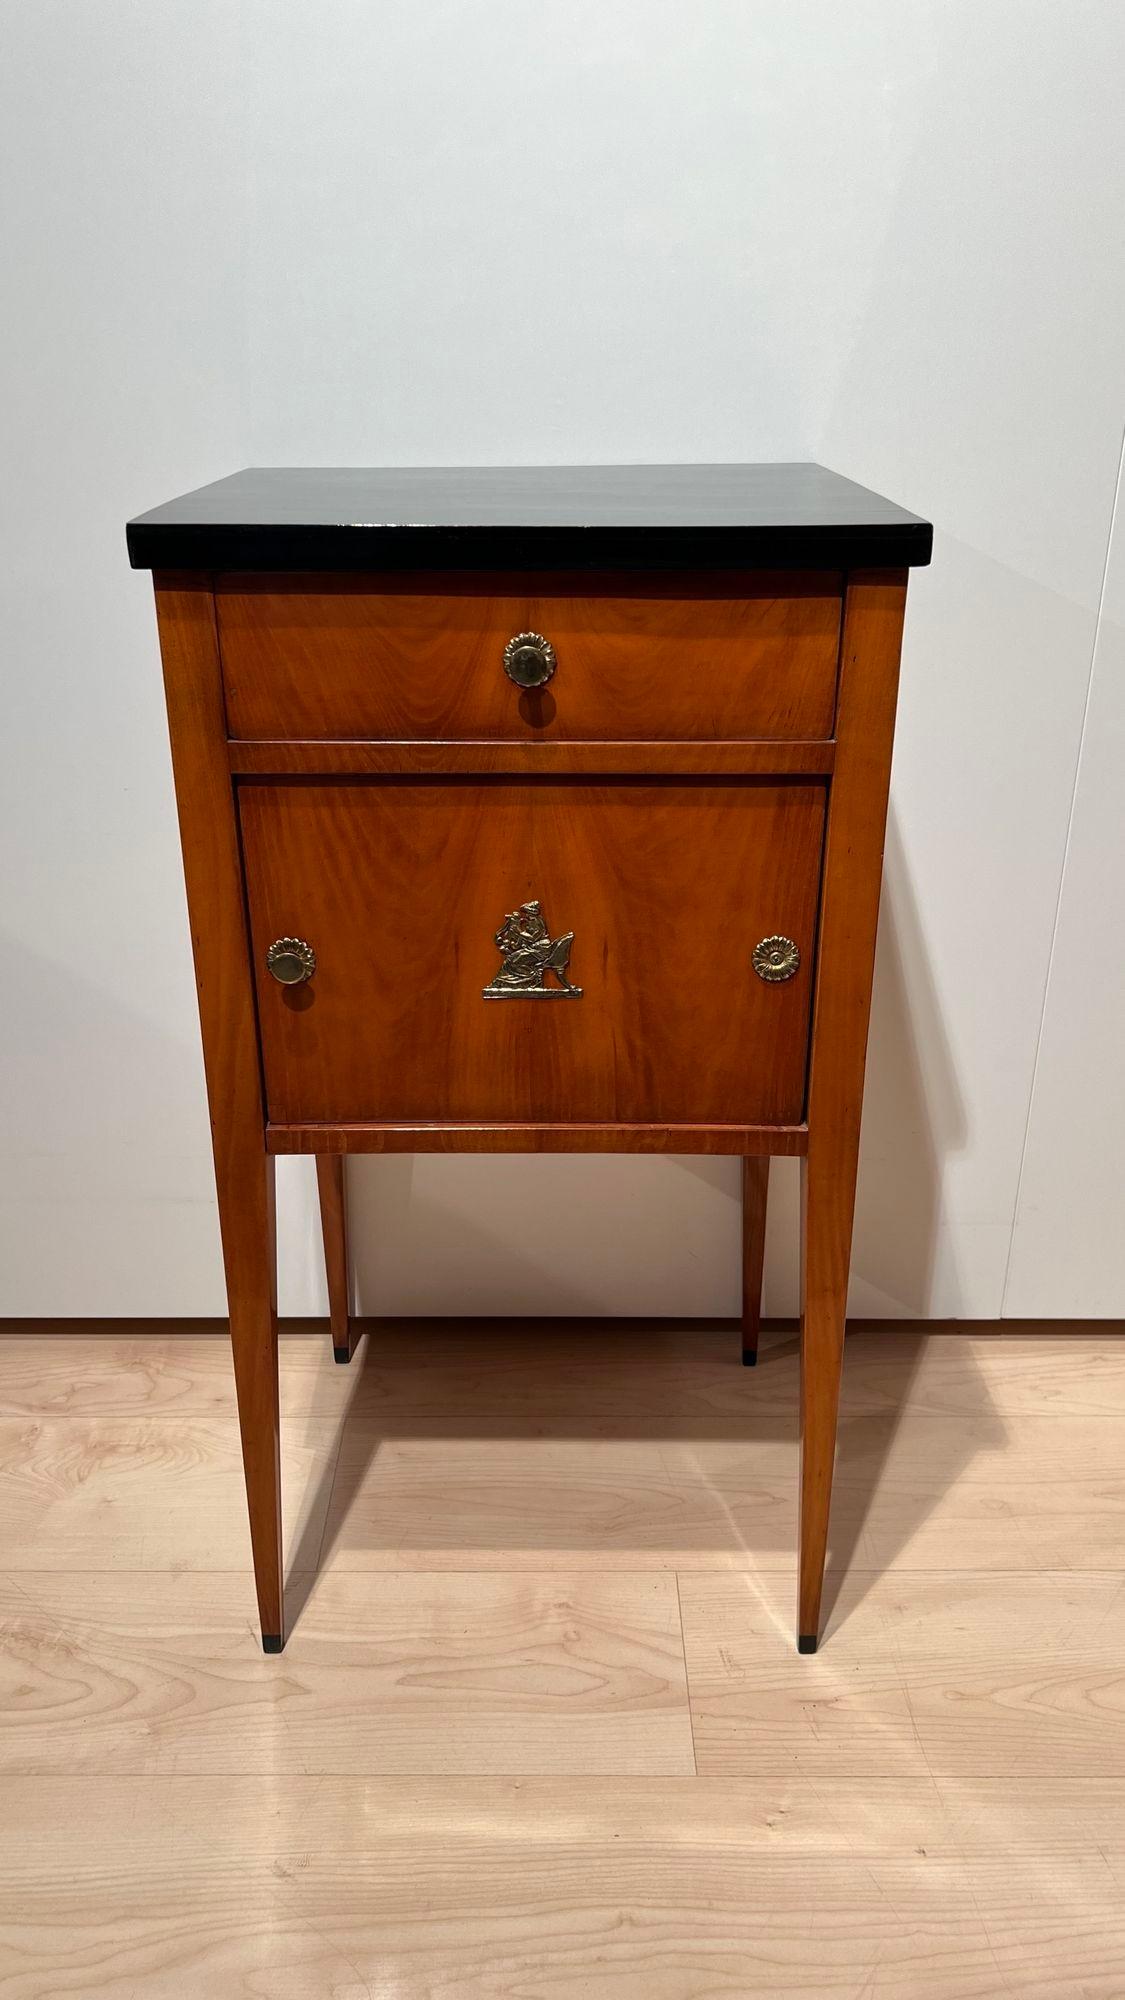 Fine Biedermeier small furniture or pillar cabinet from southern Germany around 1820.

Solid cherry wood legs and veneered body. Ebonized top plate.
One drawer at the top. Below one door with a beautiful central brass ornament of a woman playing the